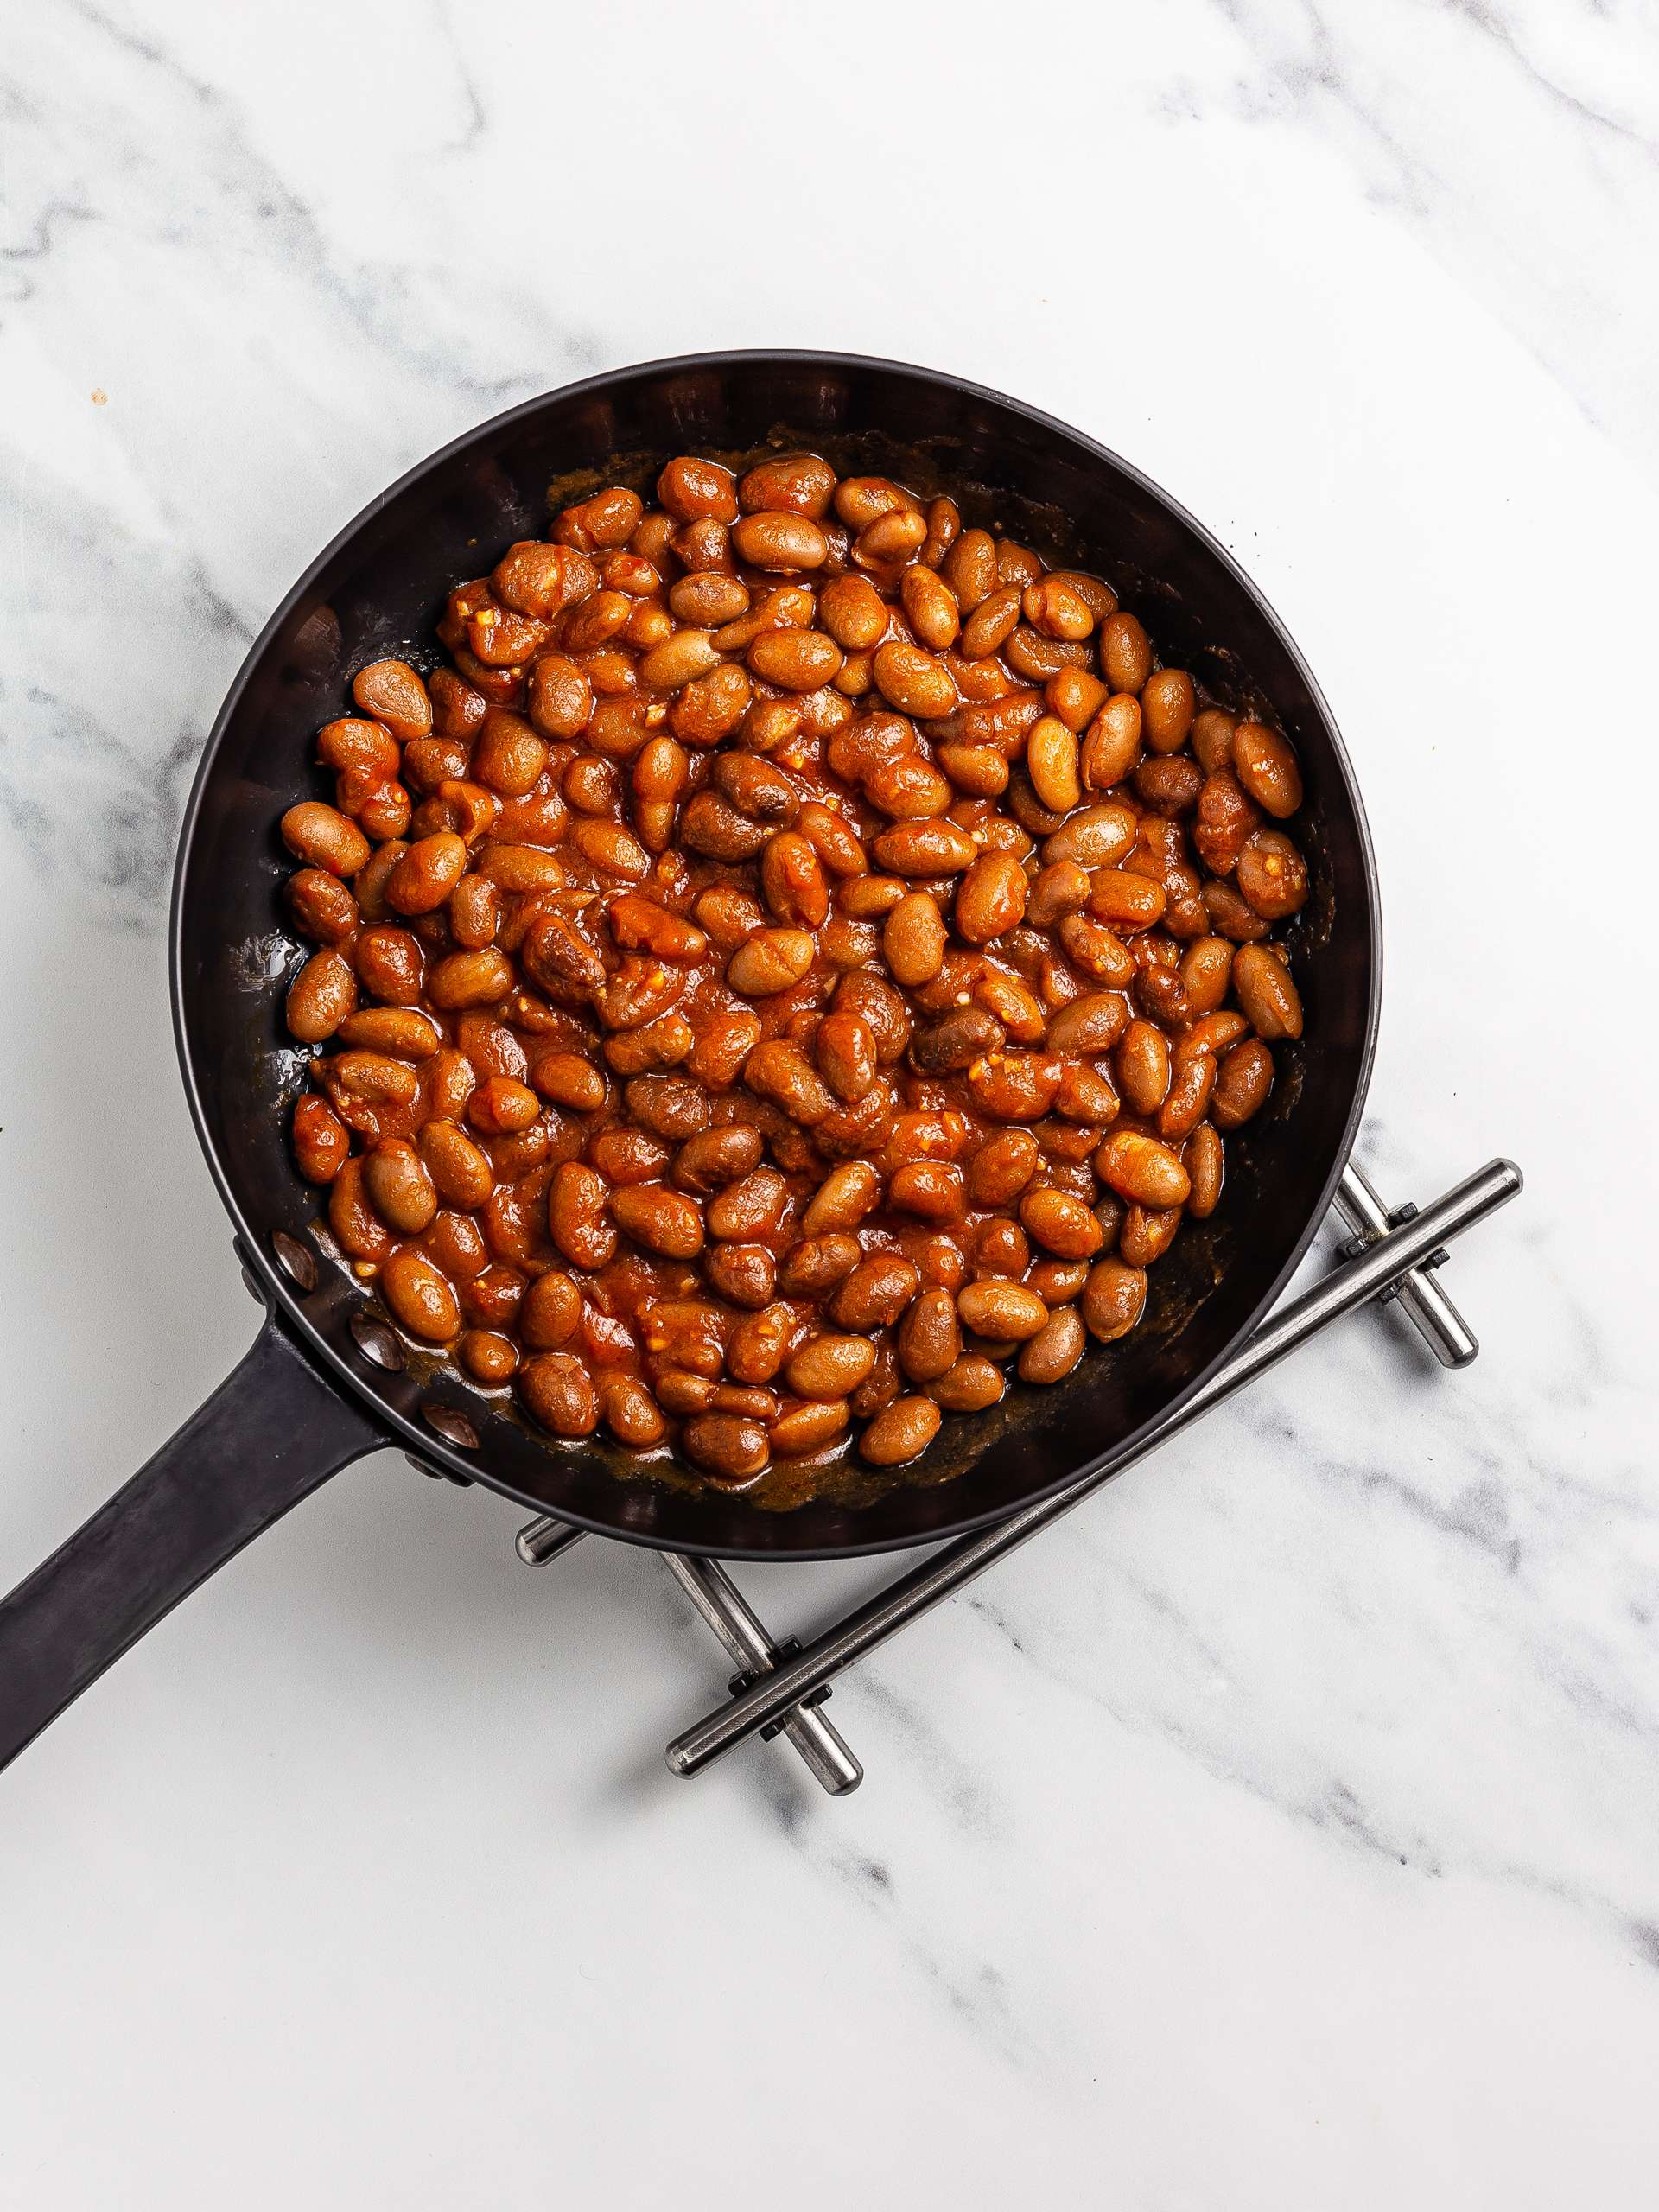 Baked beans with pinto beans and tomato sauce